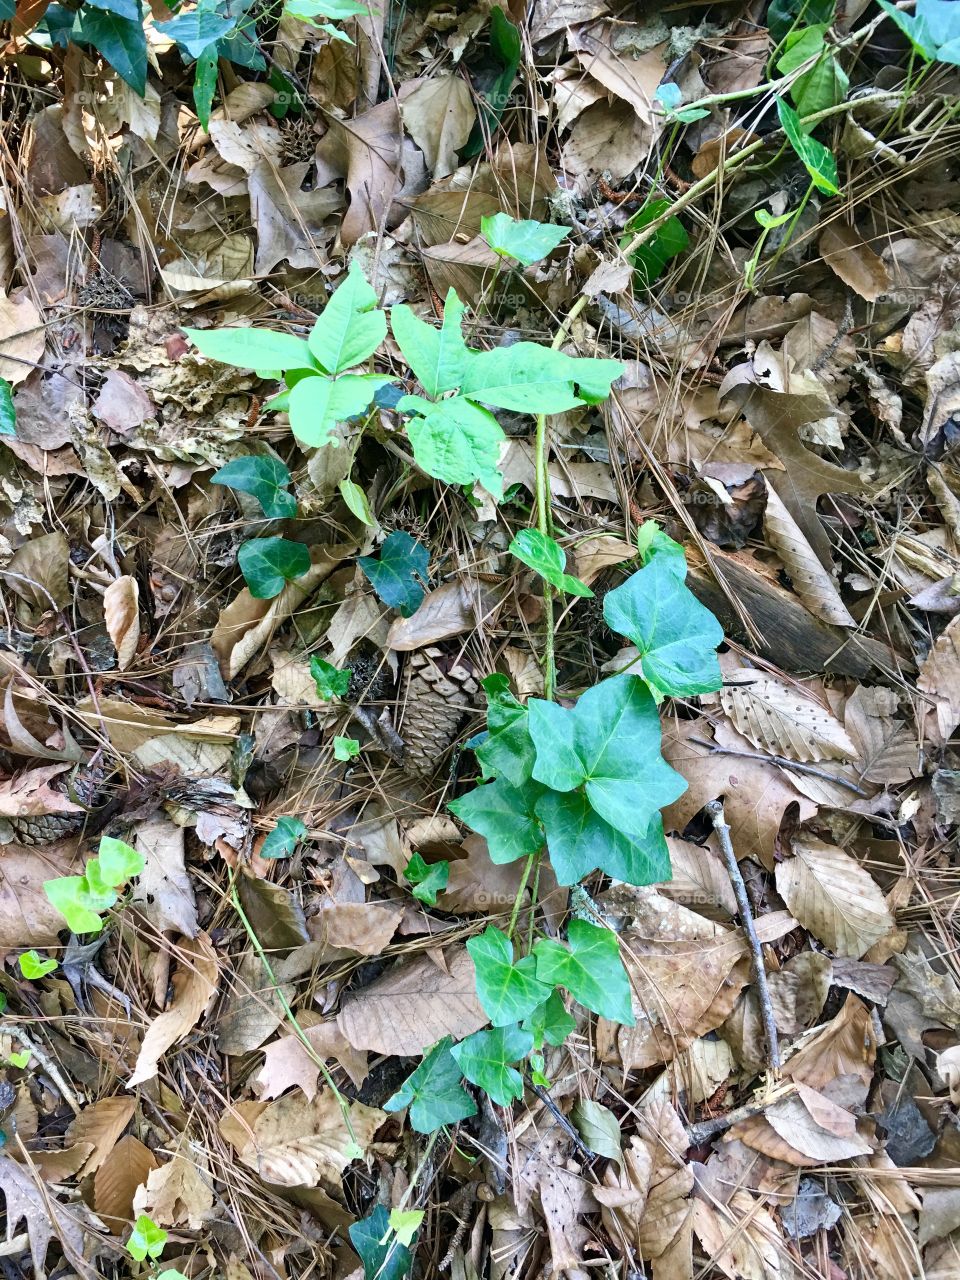 Poison Ivy on the ground.